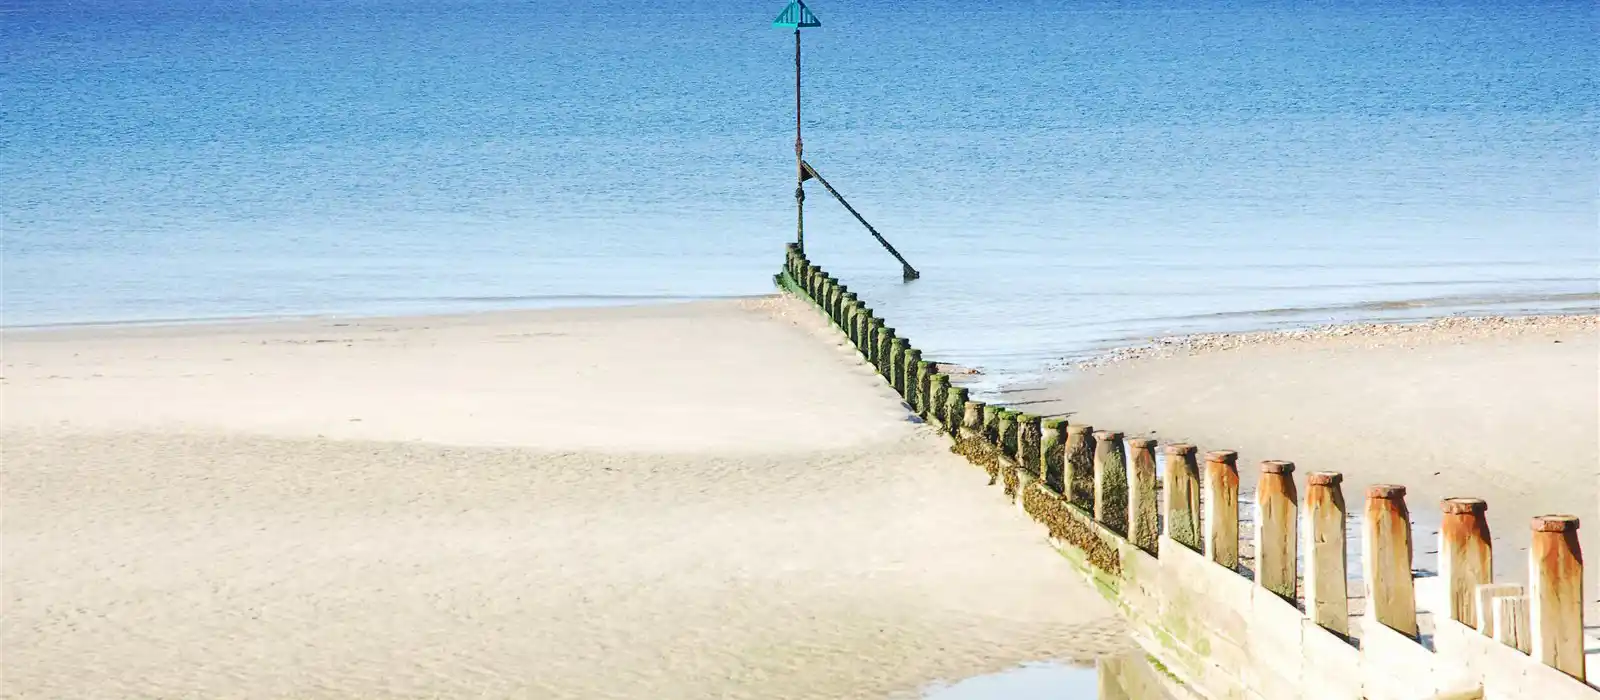 West Wittering Beach is within easy reach of Portsmouth